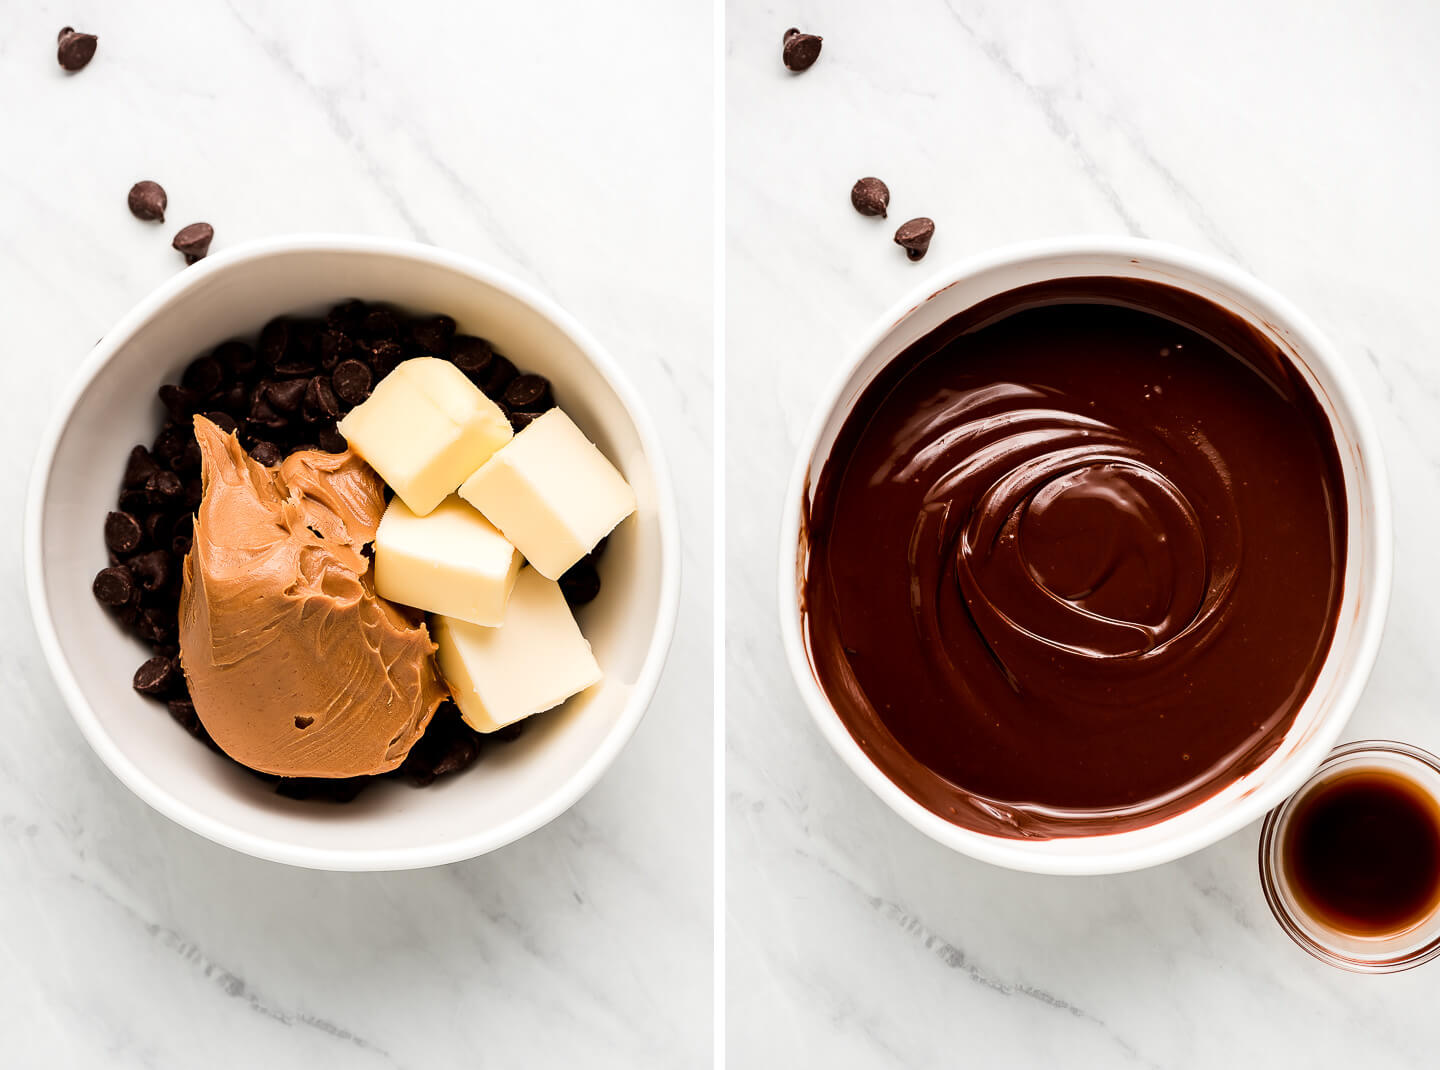 Diptych- Bowl with chocolate chips, peanut butter, and butter; melted and mixed together.